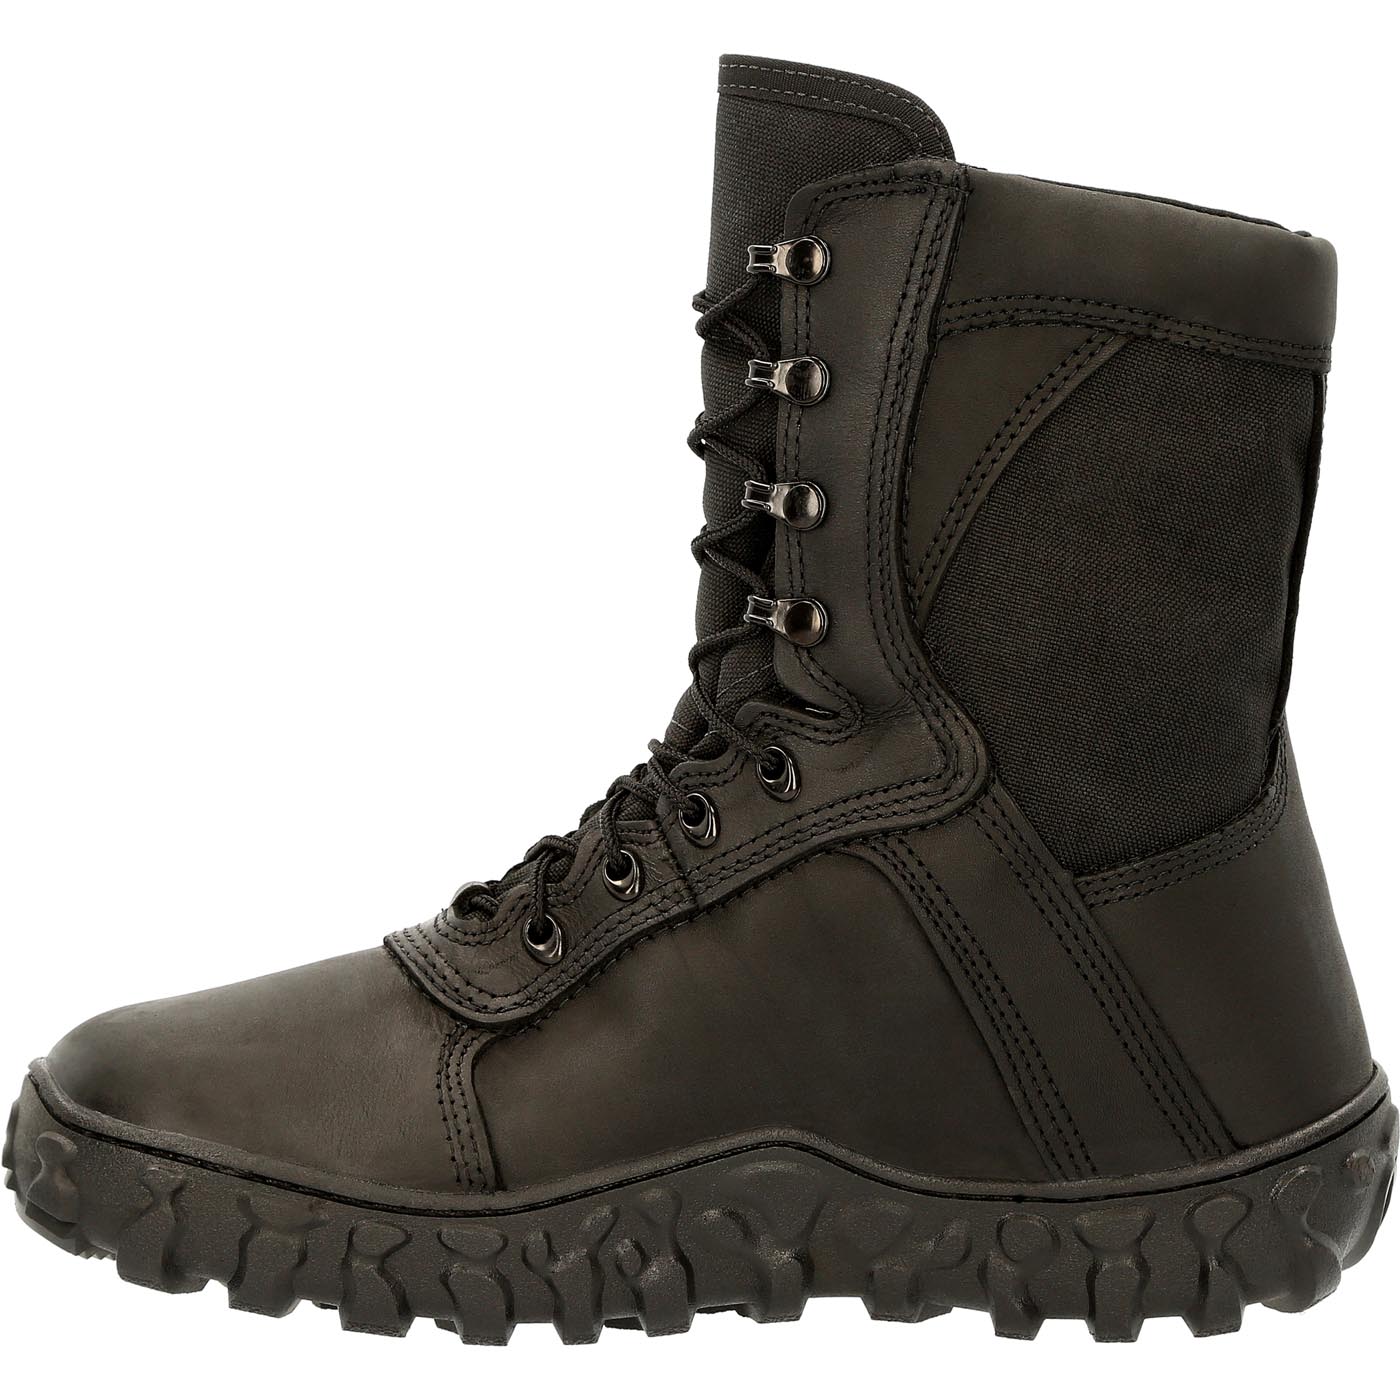 Rocky Black S2V GORE-TEX® 400G Insulated Tactical Military Boot, RKC078